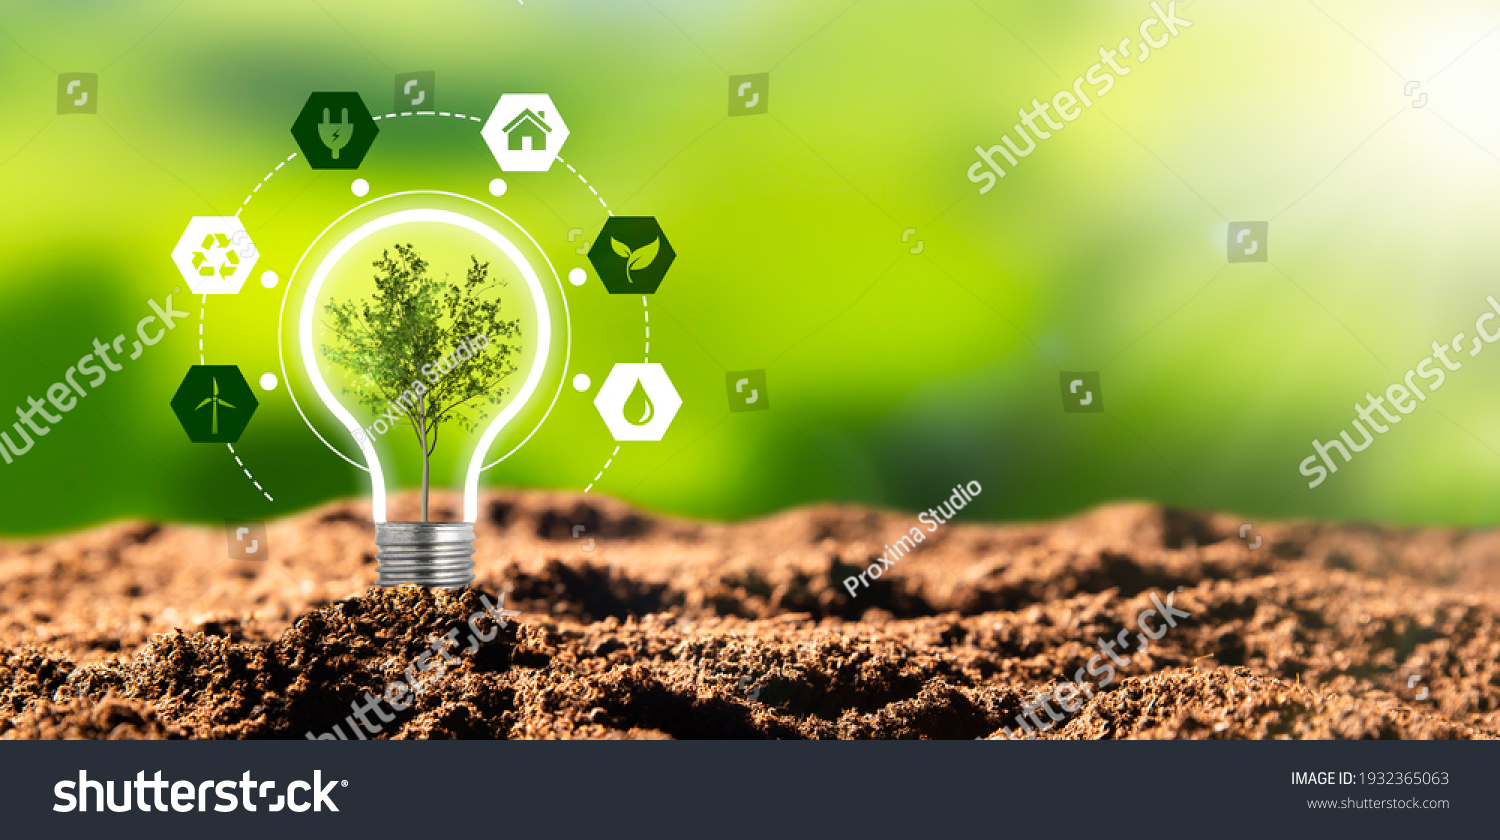 Environmental protection, renewable, sustainable energy sources. Plant growing in the bulb concept #1932365063